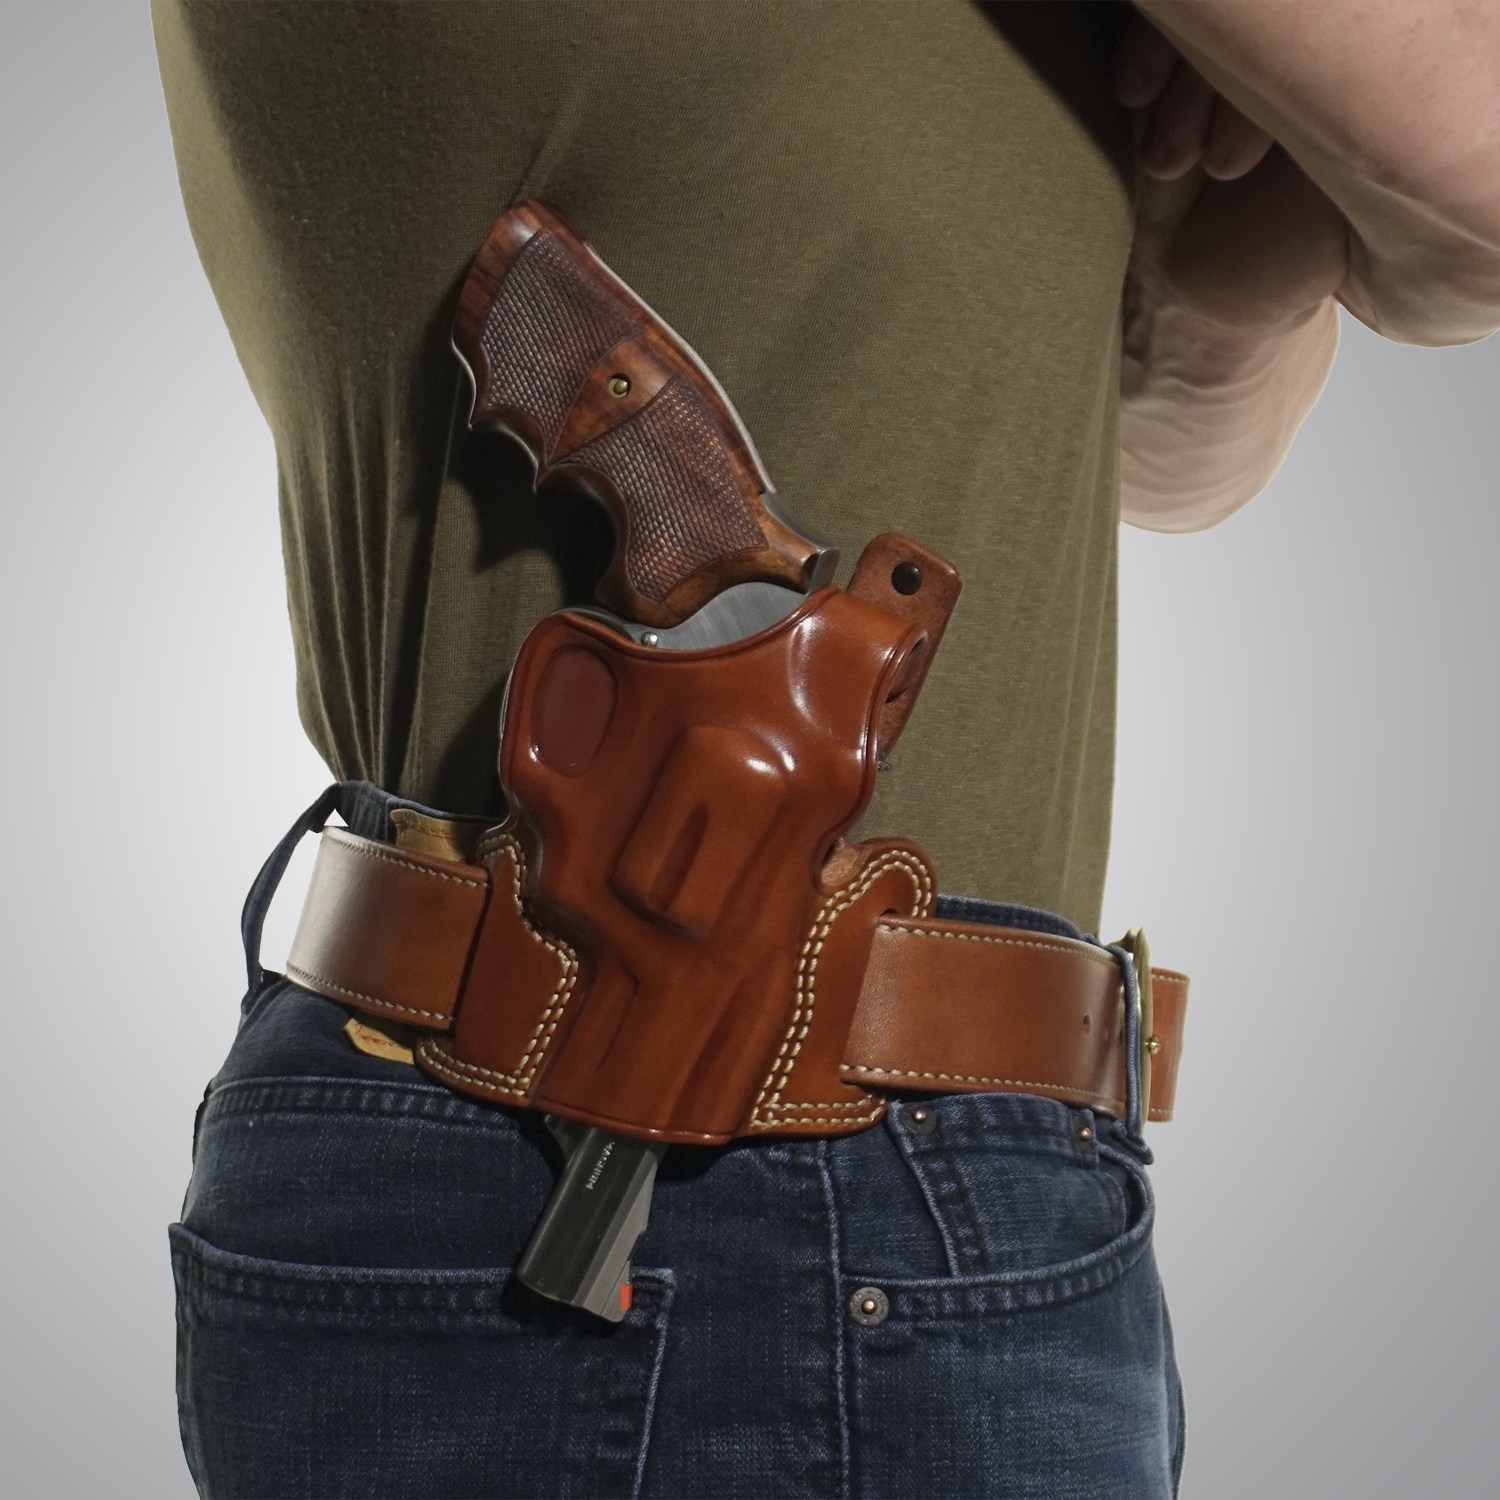 SILHOUETTE HIGH RIDE HOLSTER: Belt Holsters | Galco Gunleather